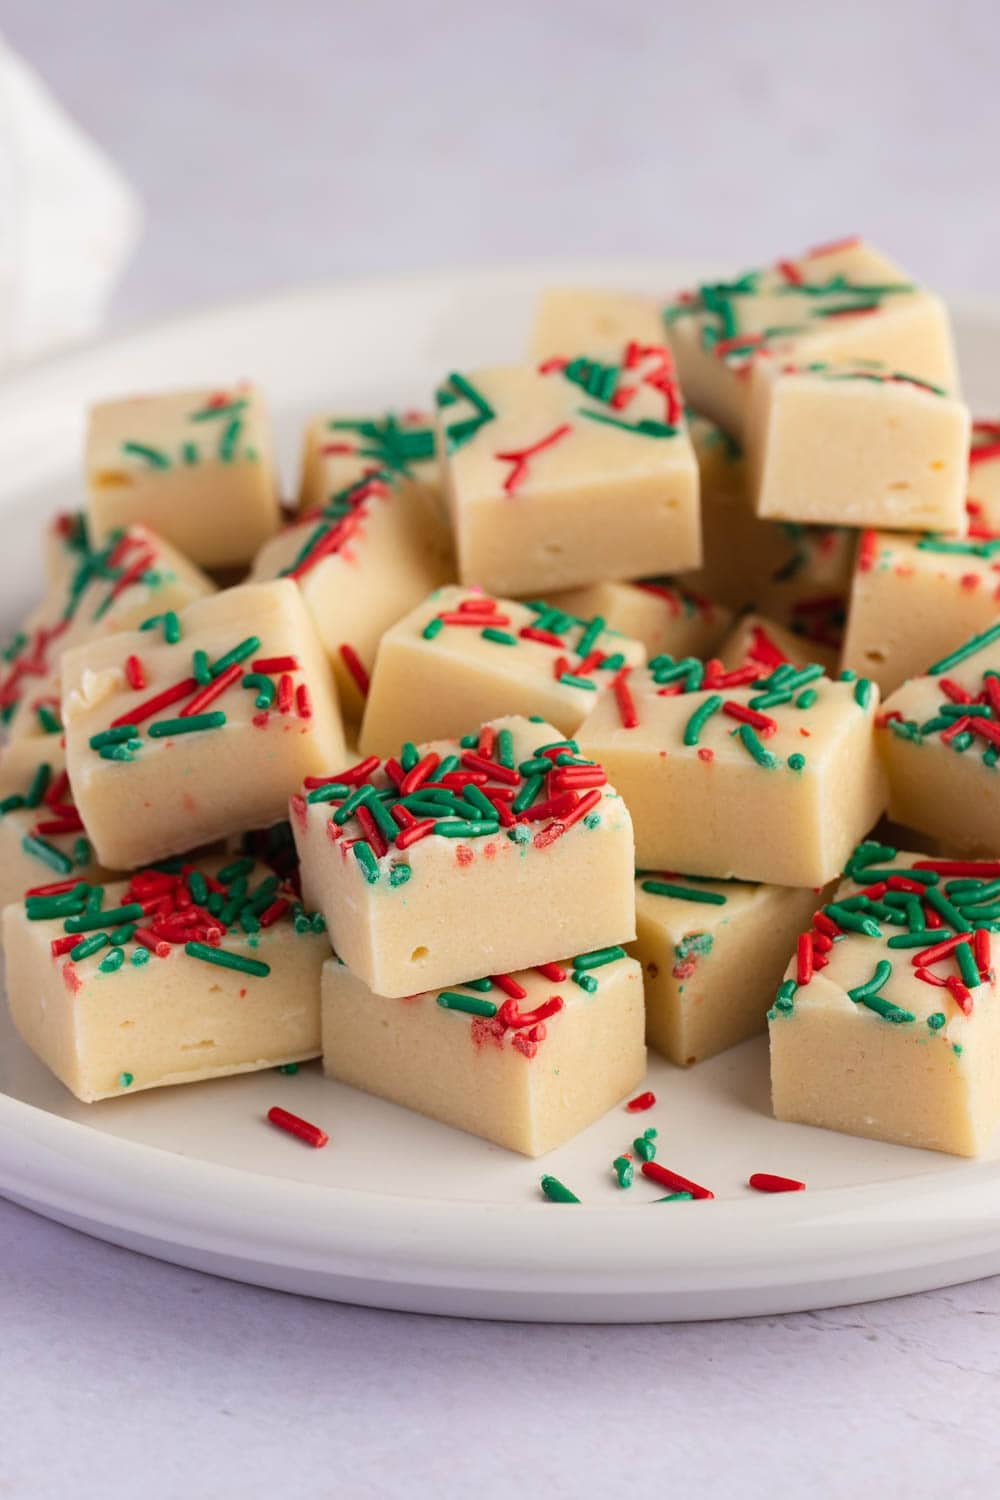 Sweet and Classic Christmas Cookie Fudge Served on a White Plate